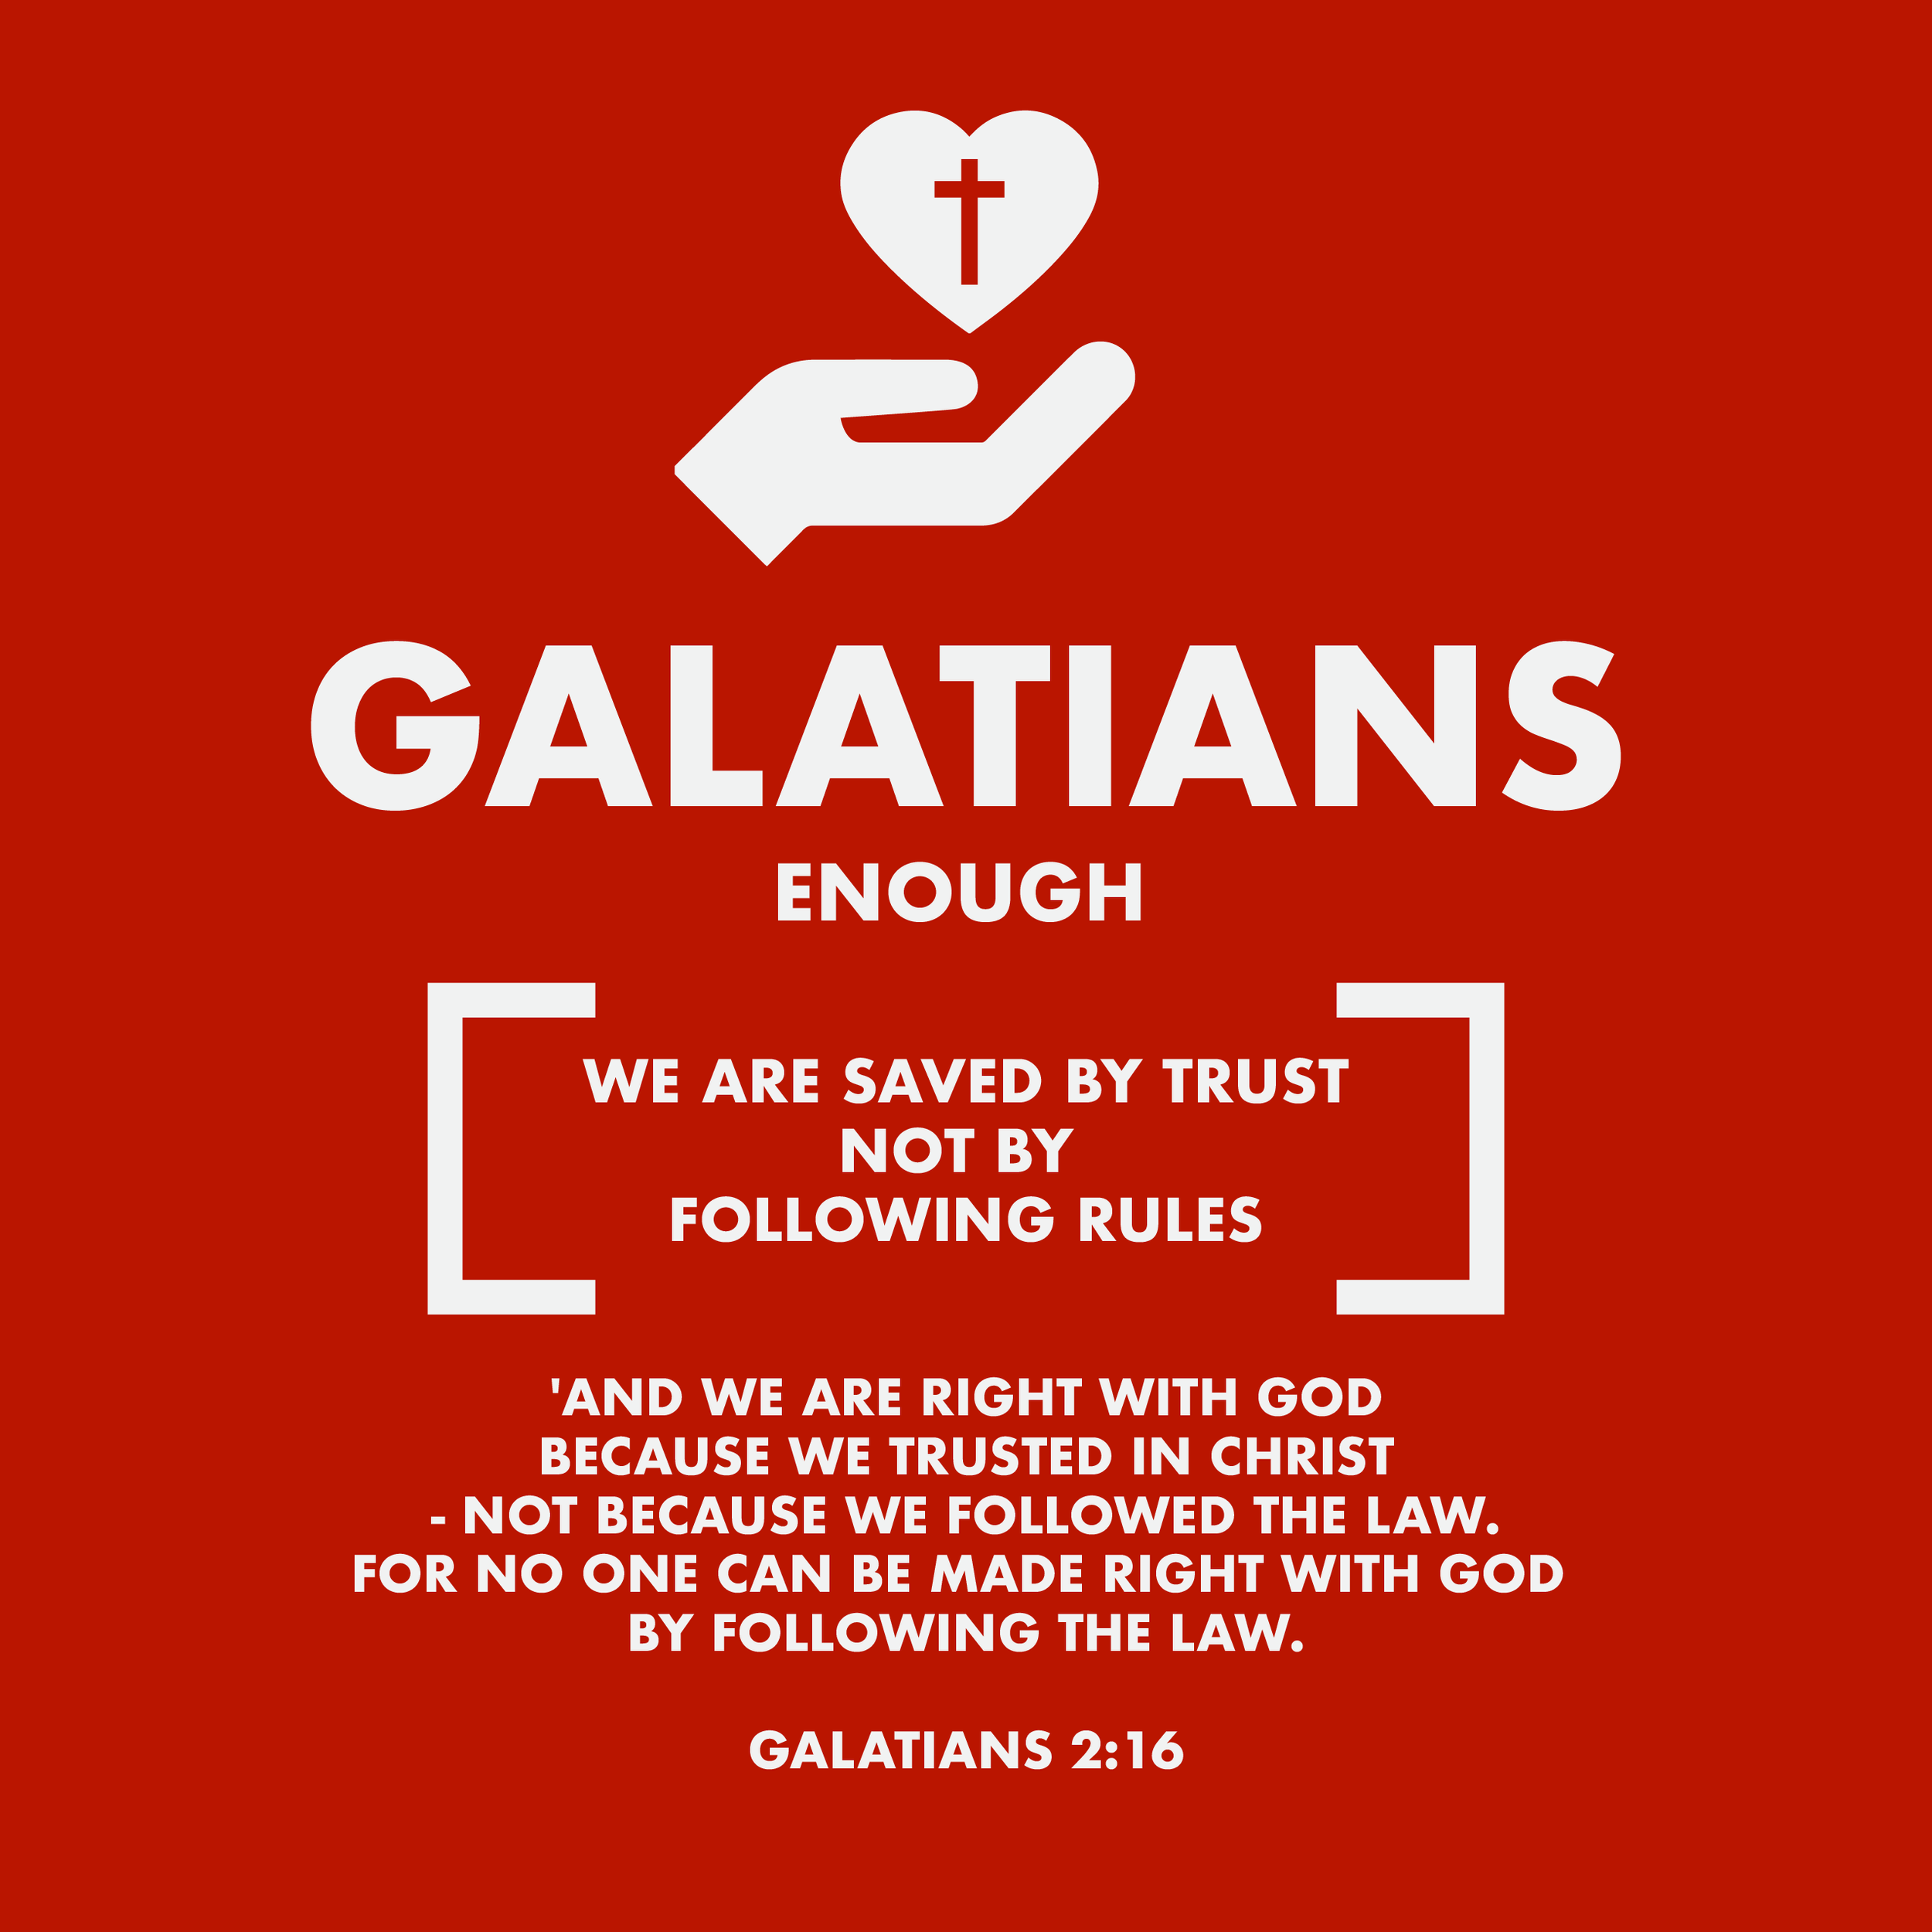 Books of the Bible_posters_46 Galatians.png